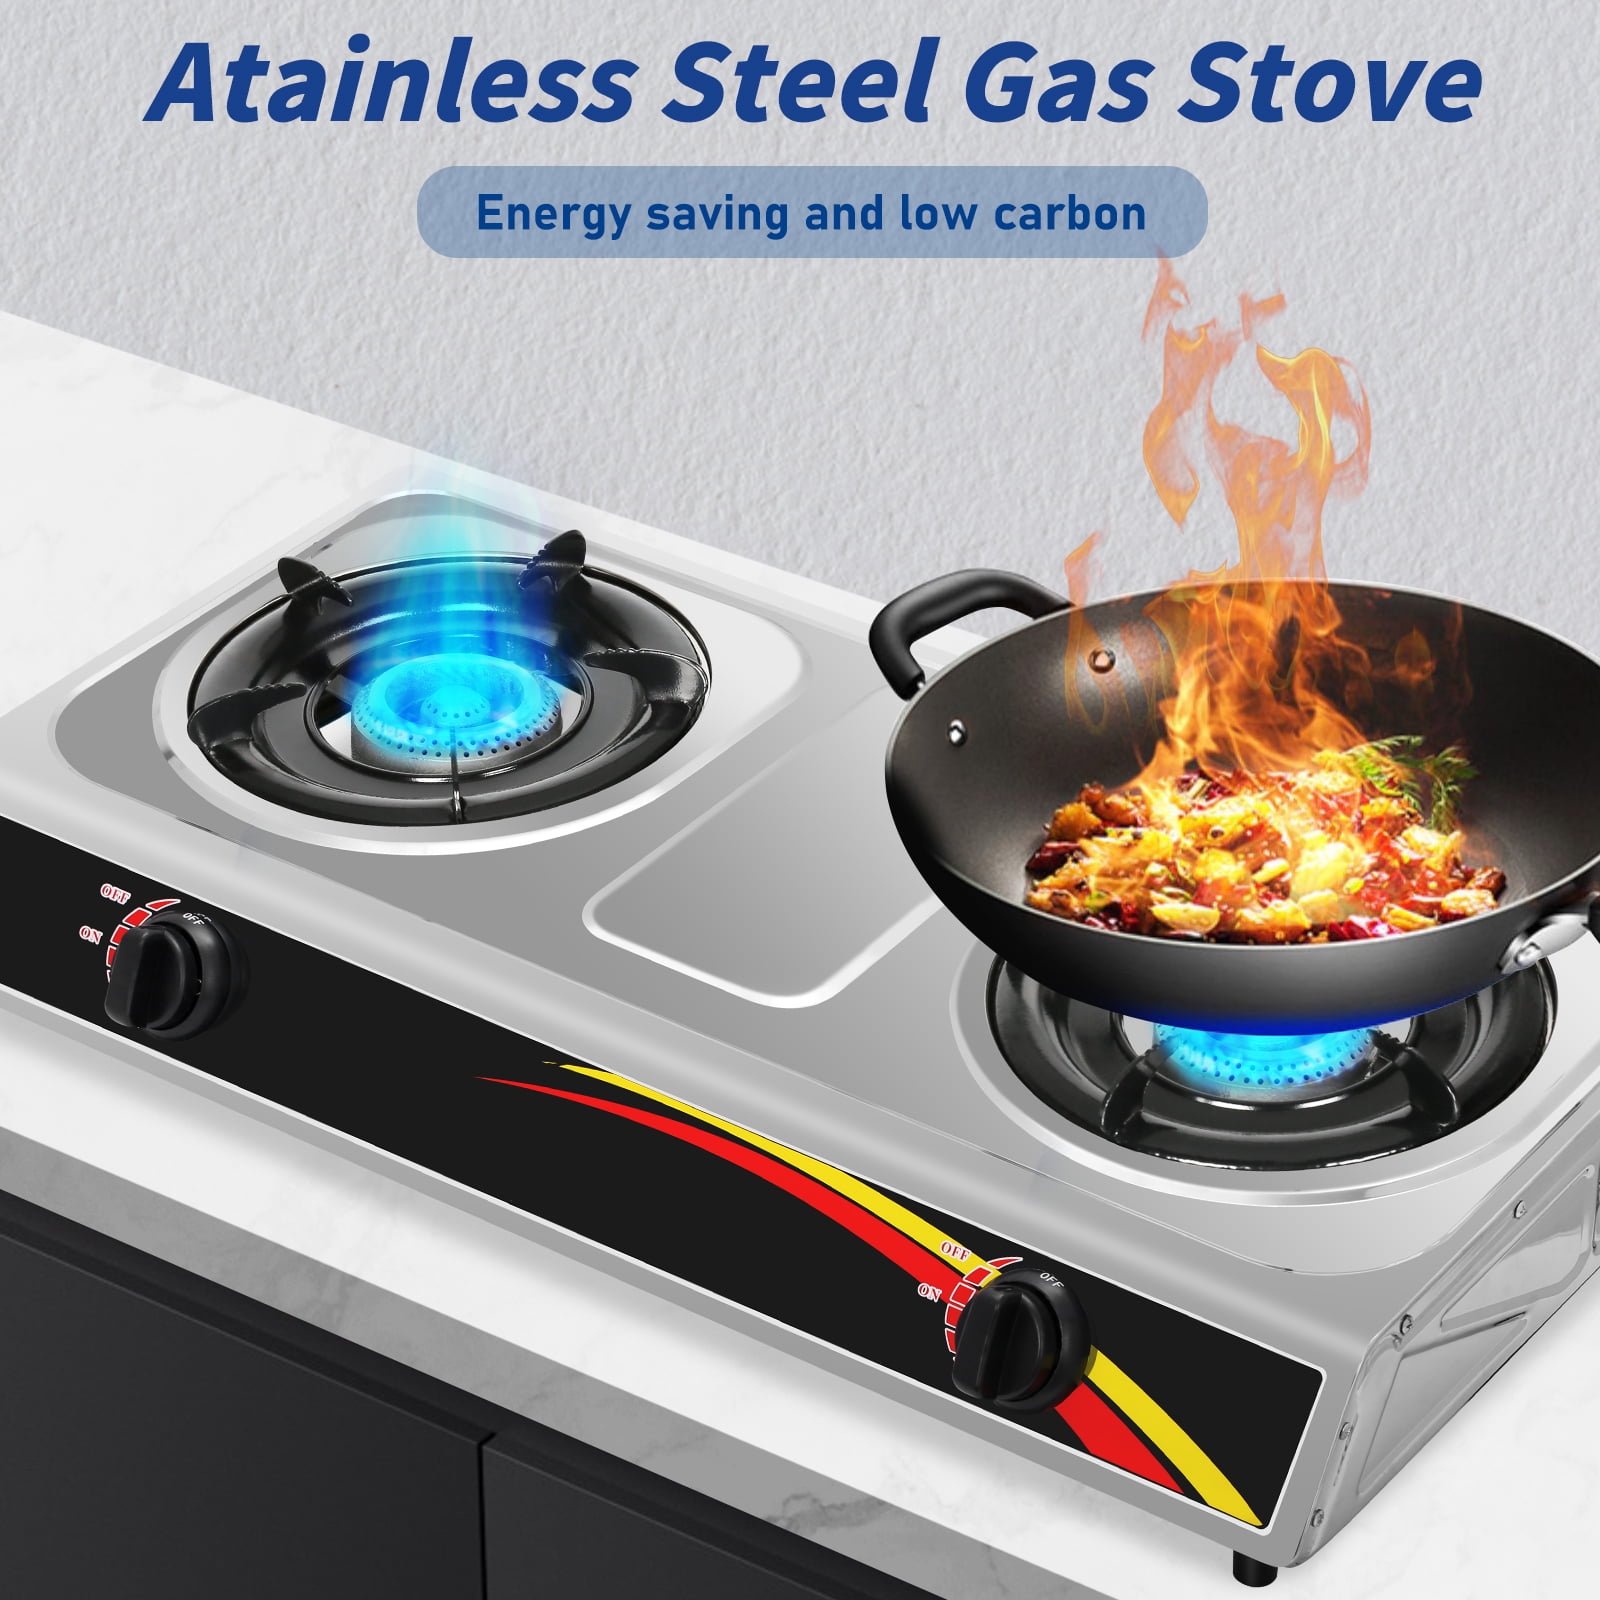 PORTABLE GAS STOVE WITH LPG CONNECTION